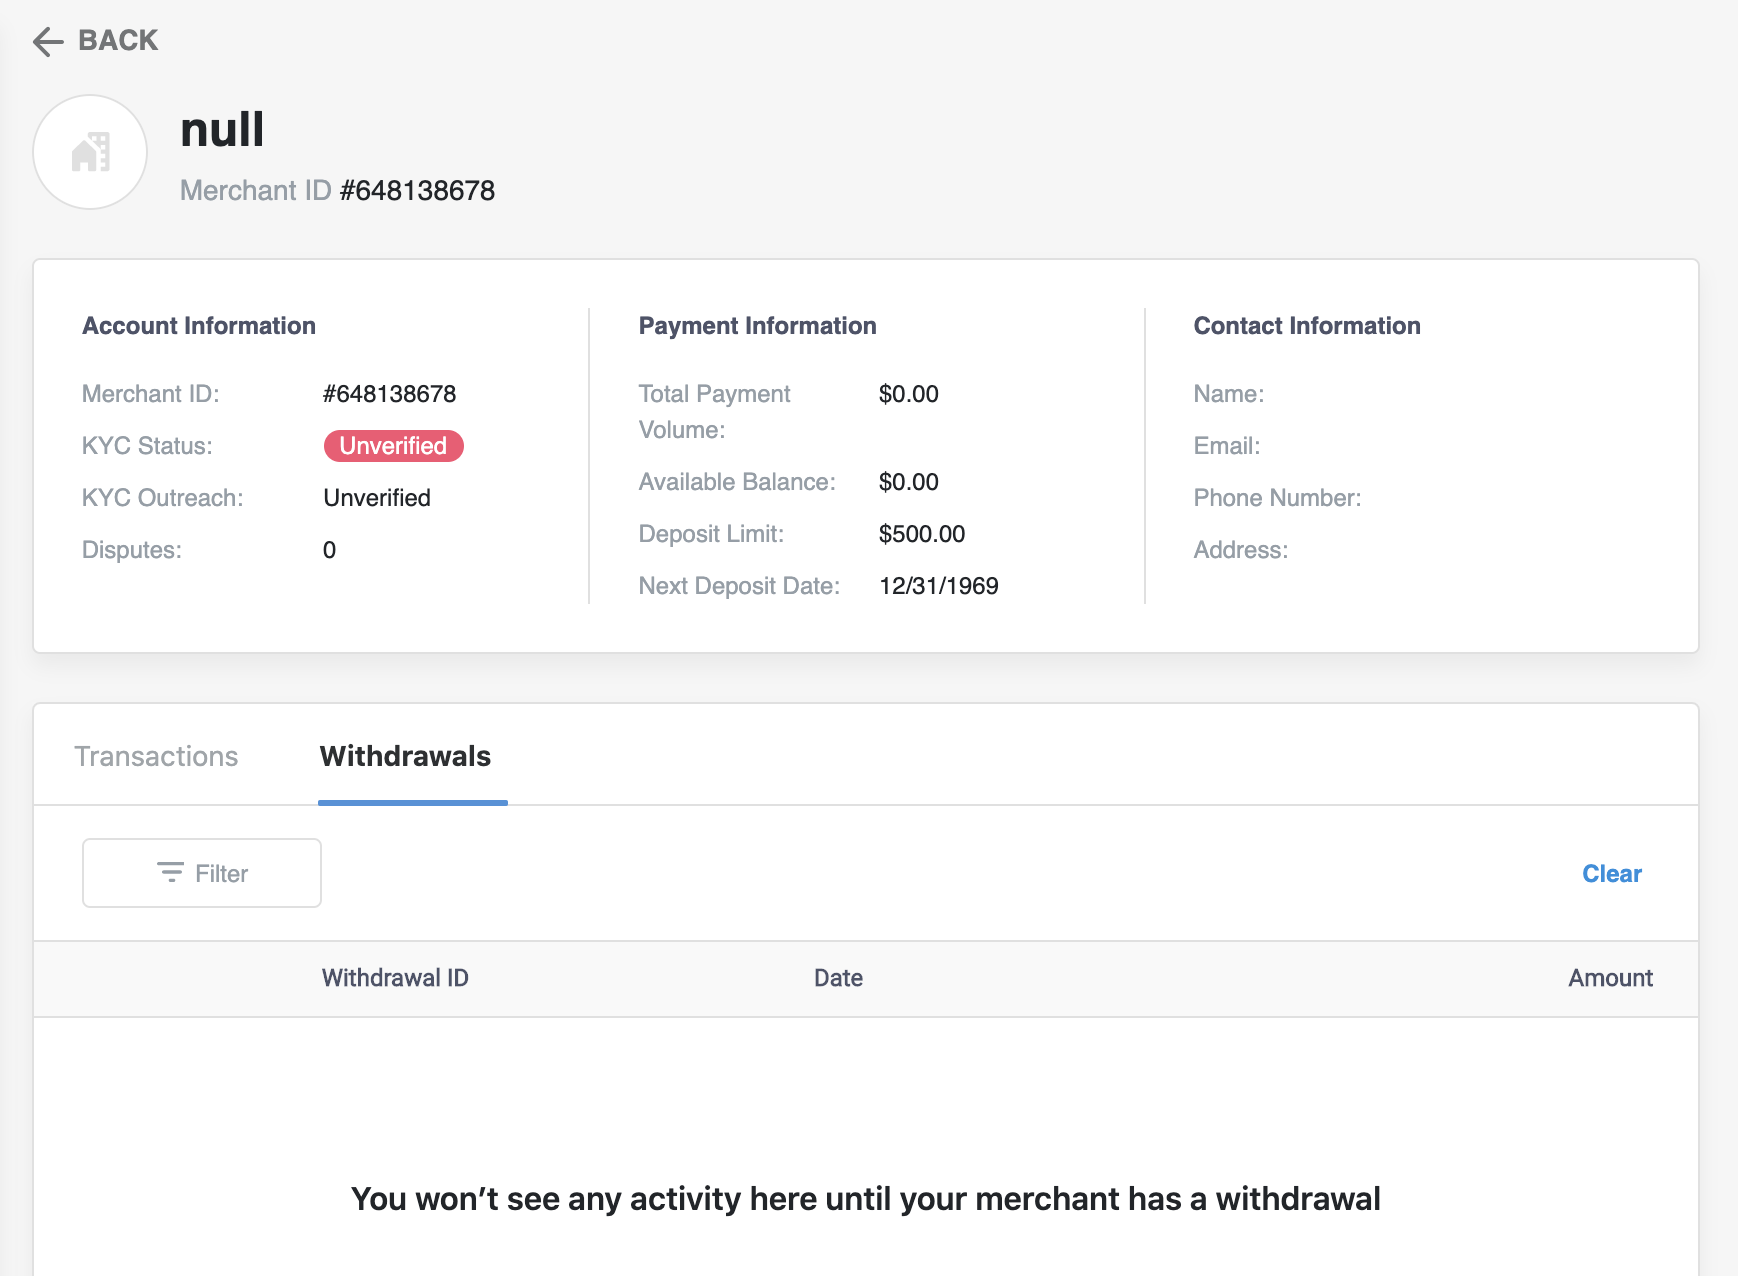 How to view a merchant's payouts in WePay's Partner Center